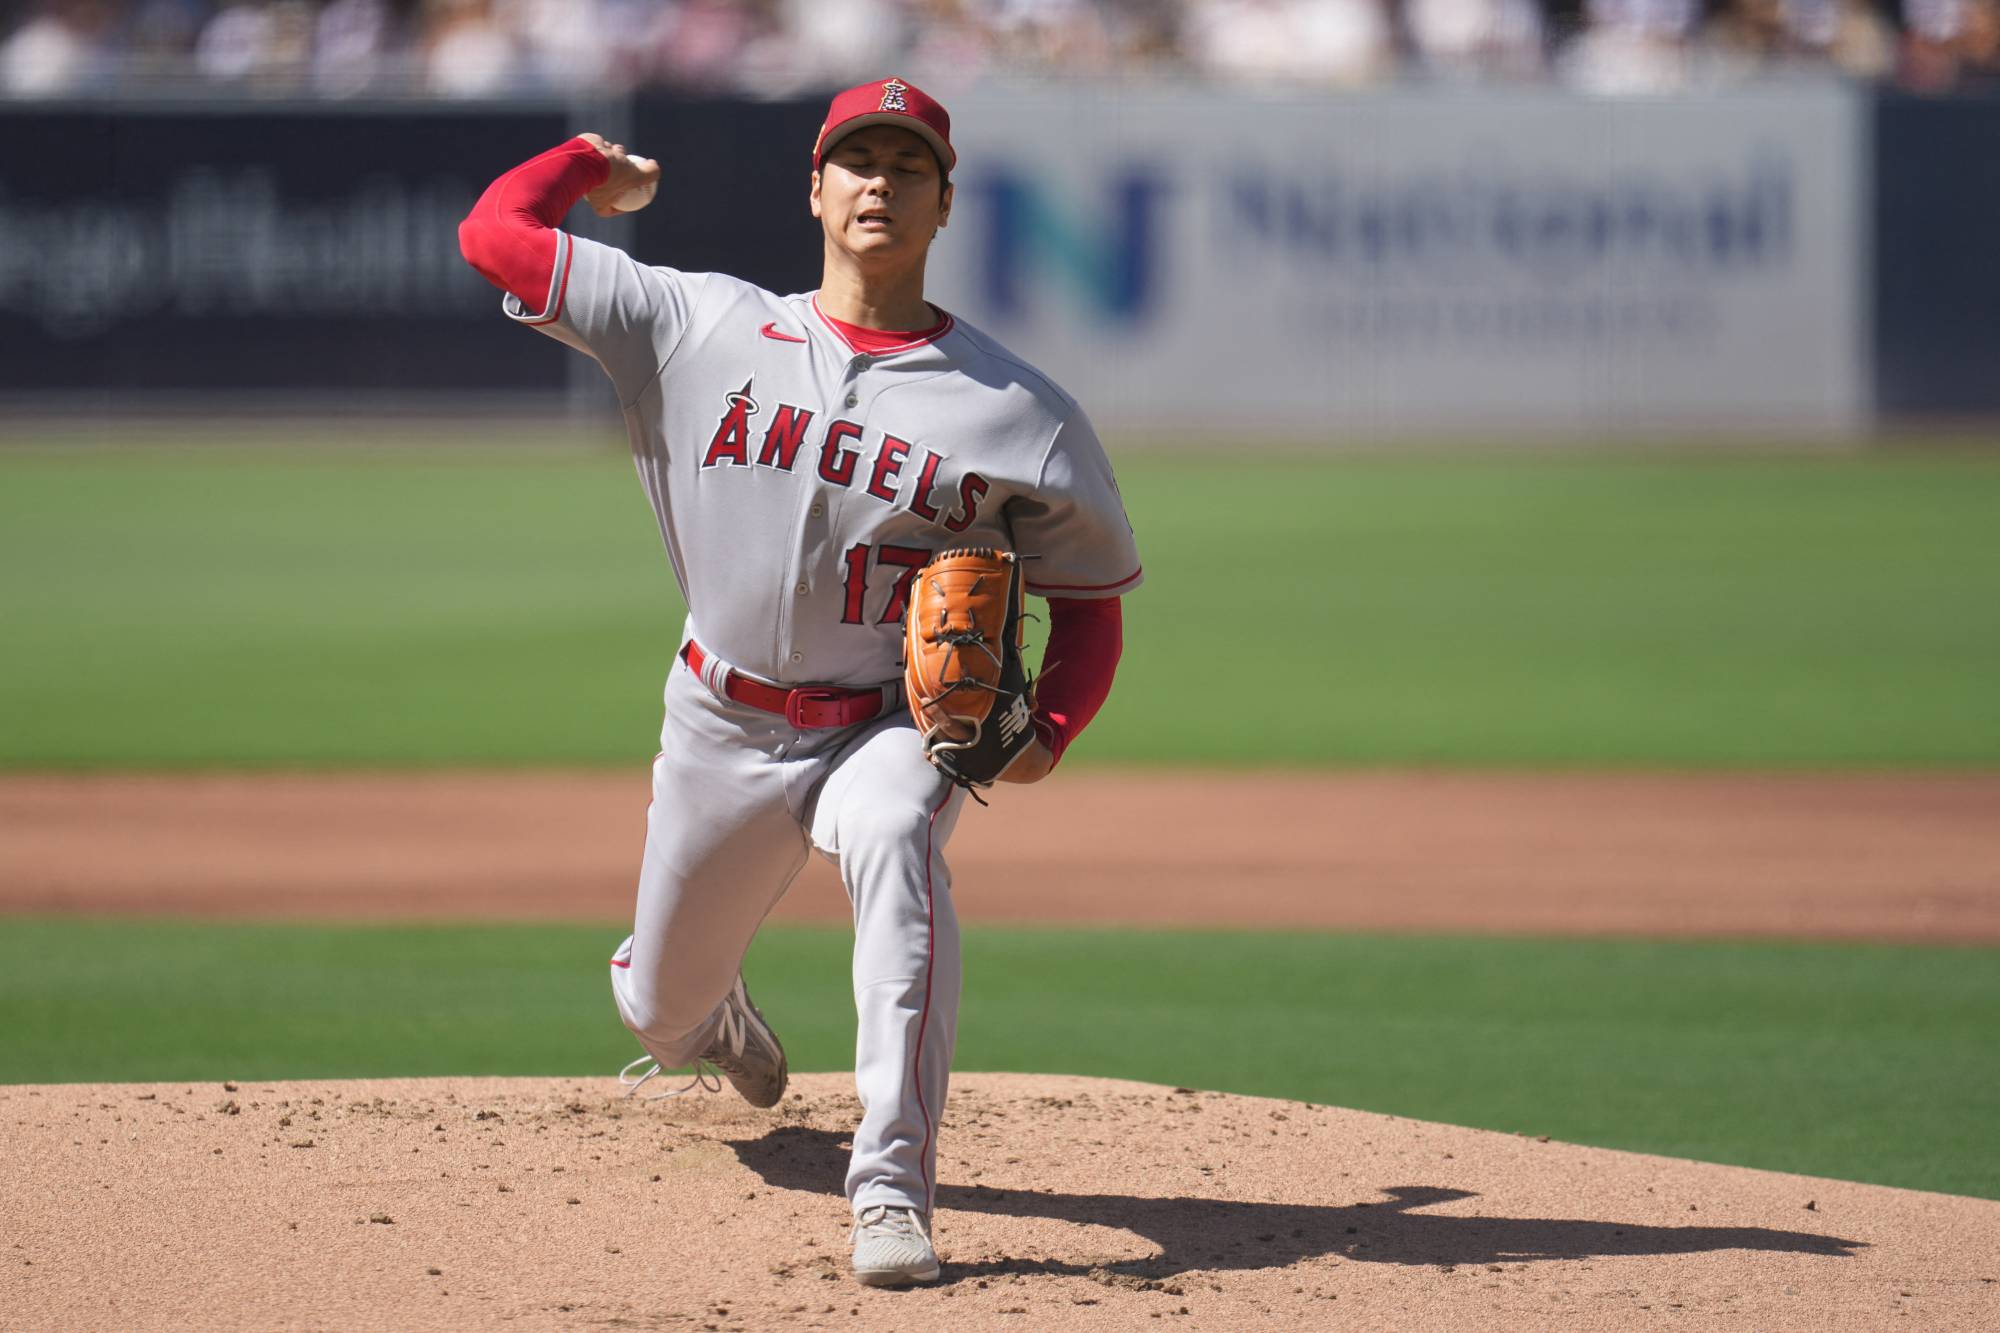 Los Angeles Angels star pitcher Shohei Ohtani pitches against the San Diego Padres at Petco Park in San Diego, California.  | RAY ACEVEDO / VIA USA TODAY SPORTS